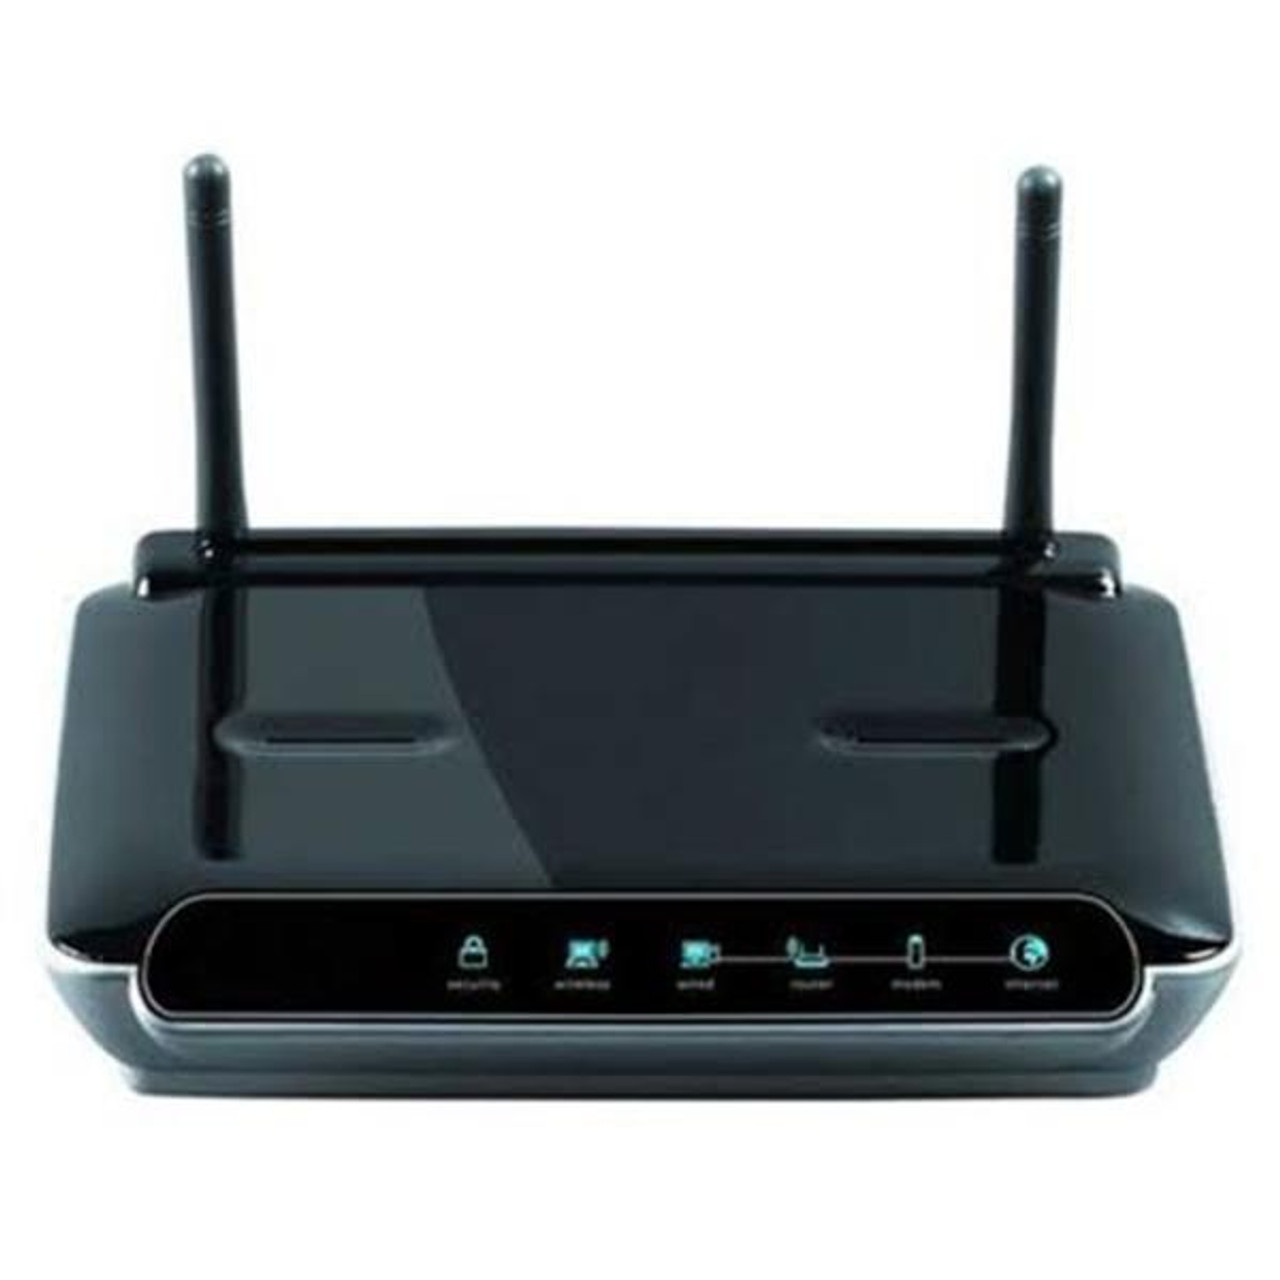 3635275 NetGear Wireless G Router With 4x 10/100 Hardwired Ports Open (Refurbished)